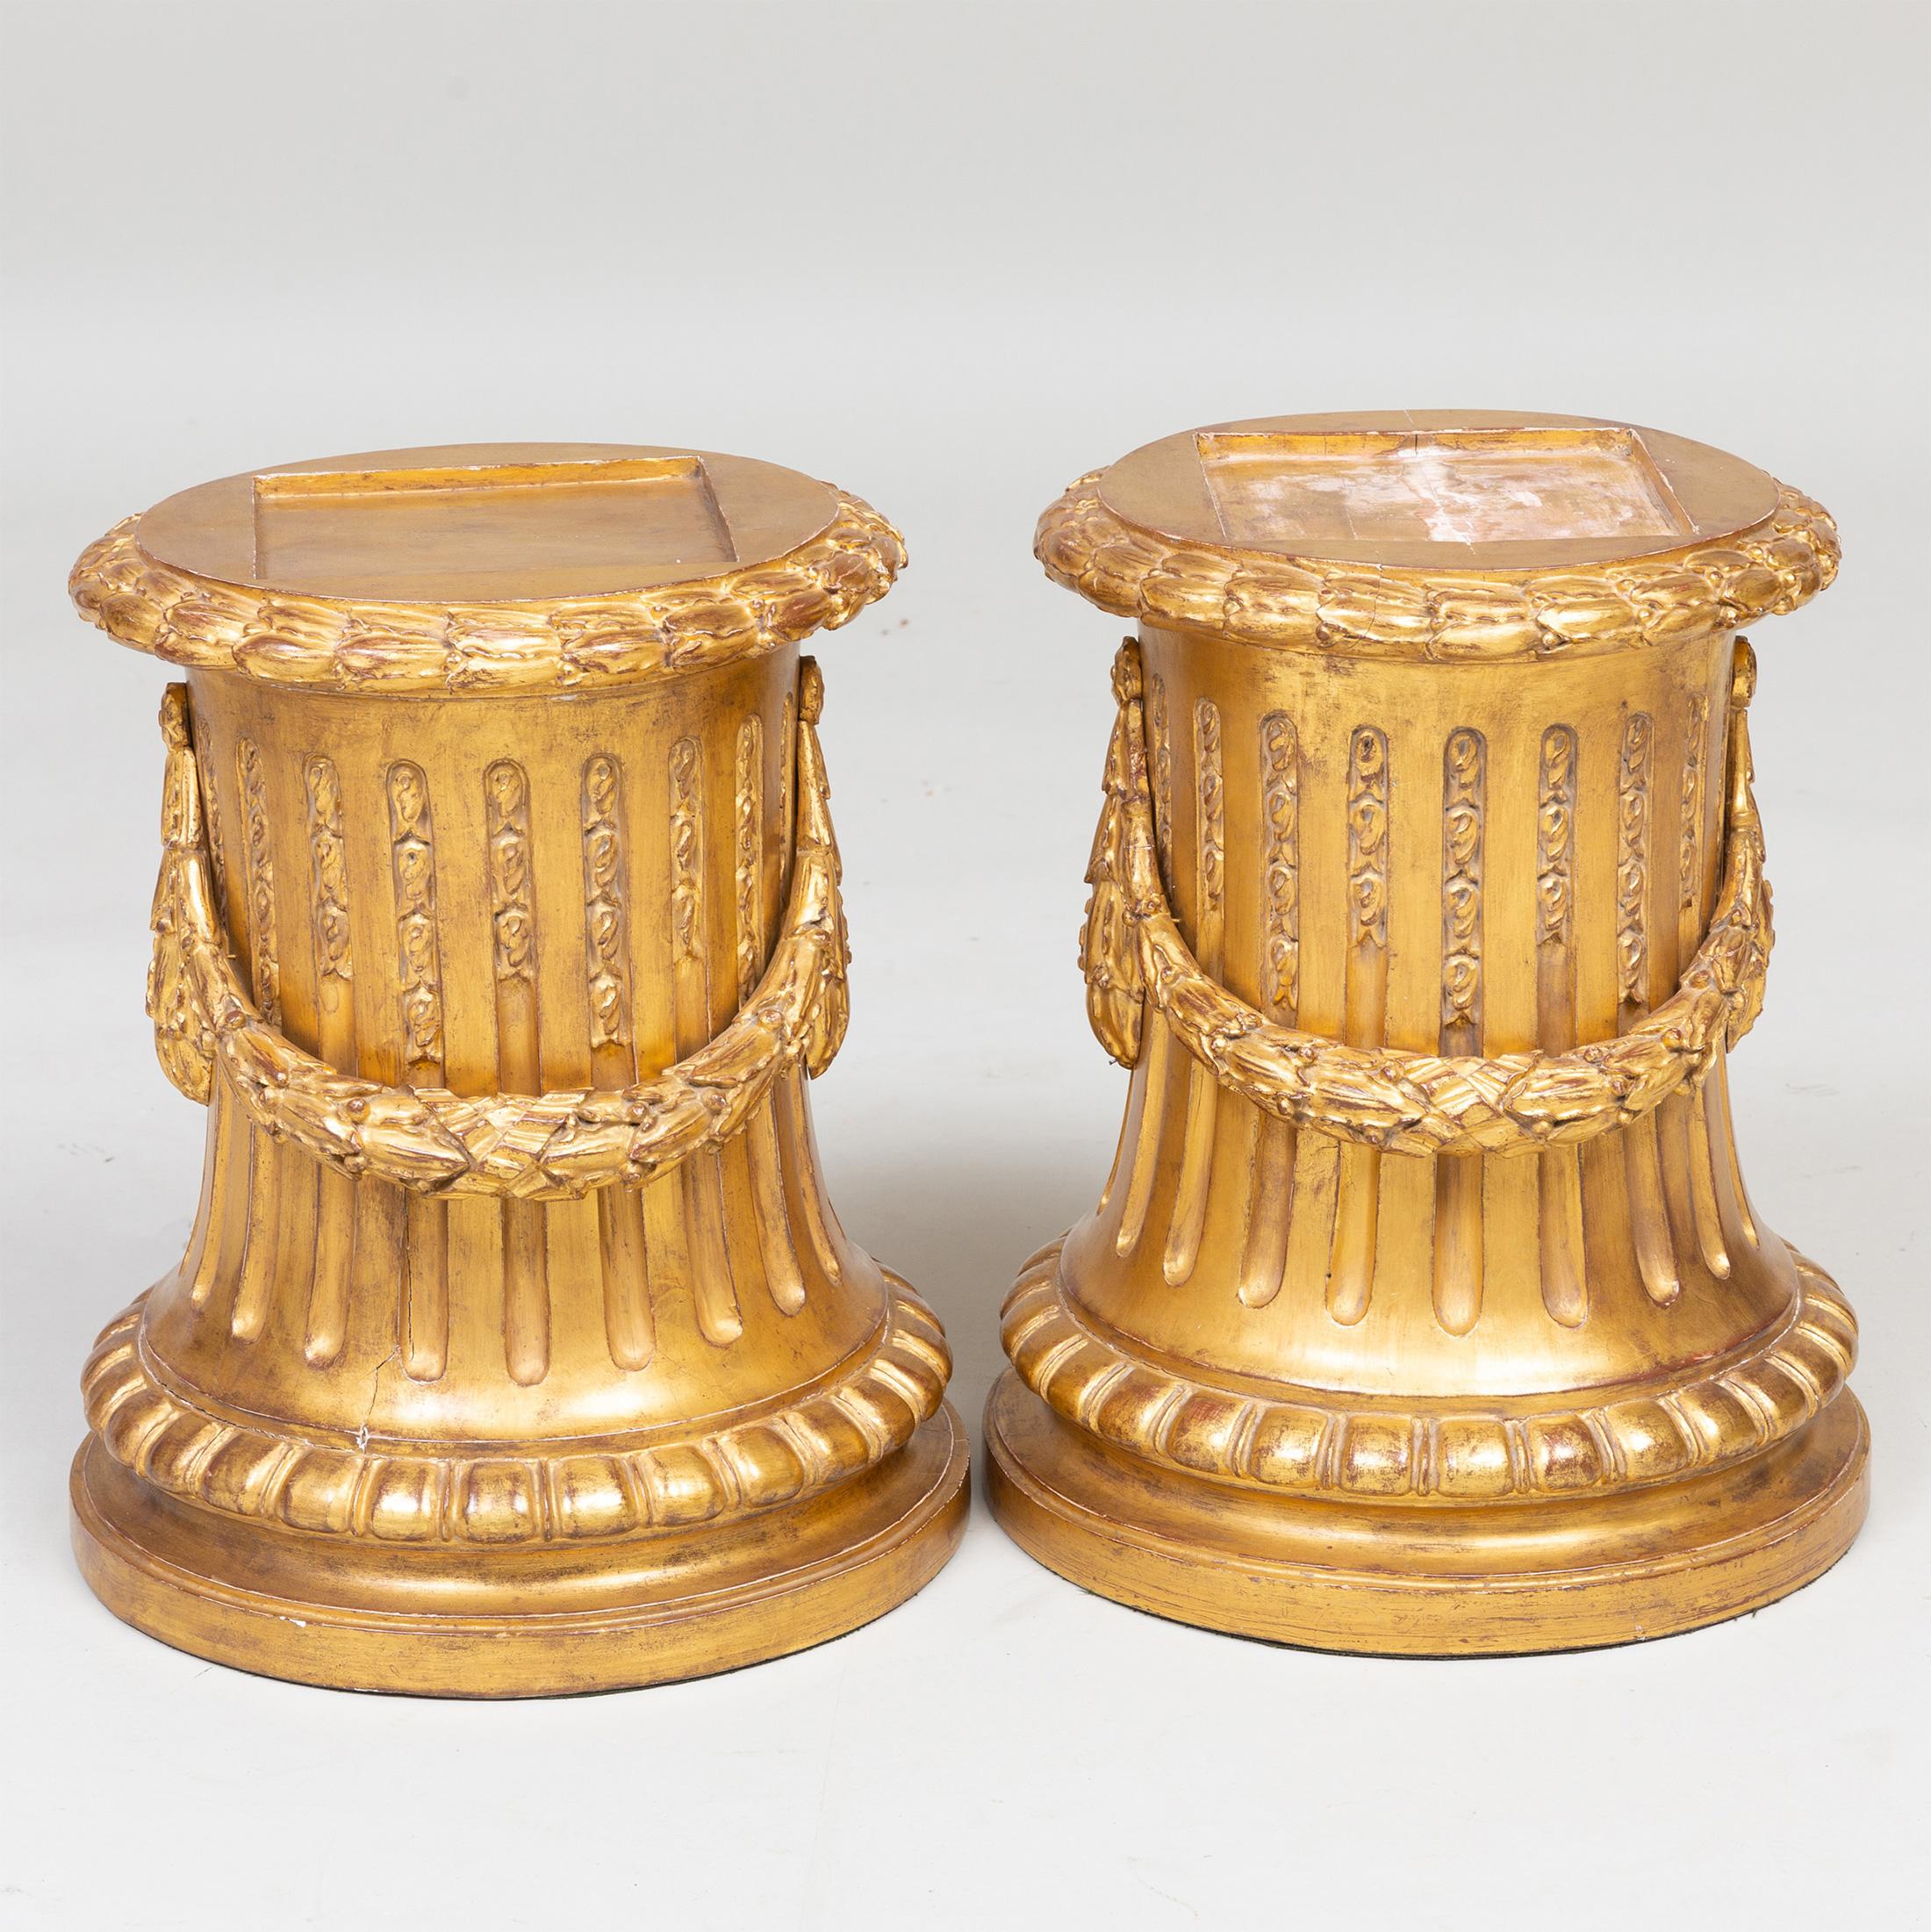 Fluted pedestals with garlands draped around the shafts and capitals. 

Date: 19th century
Origin: French
Dimension: 17 in. hight